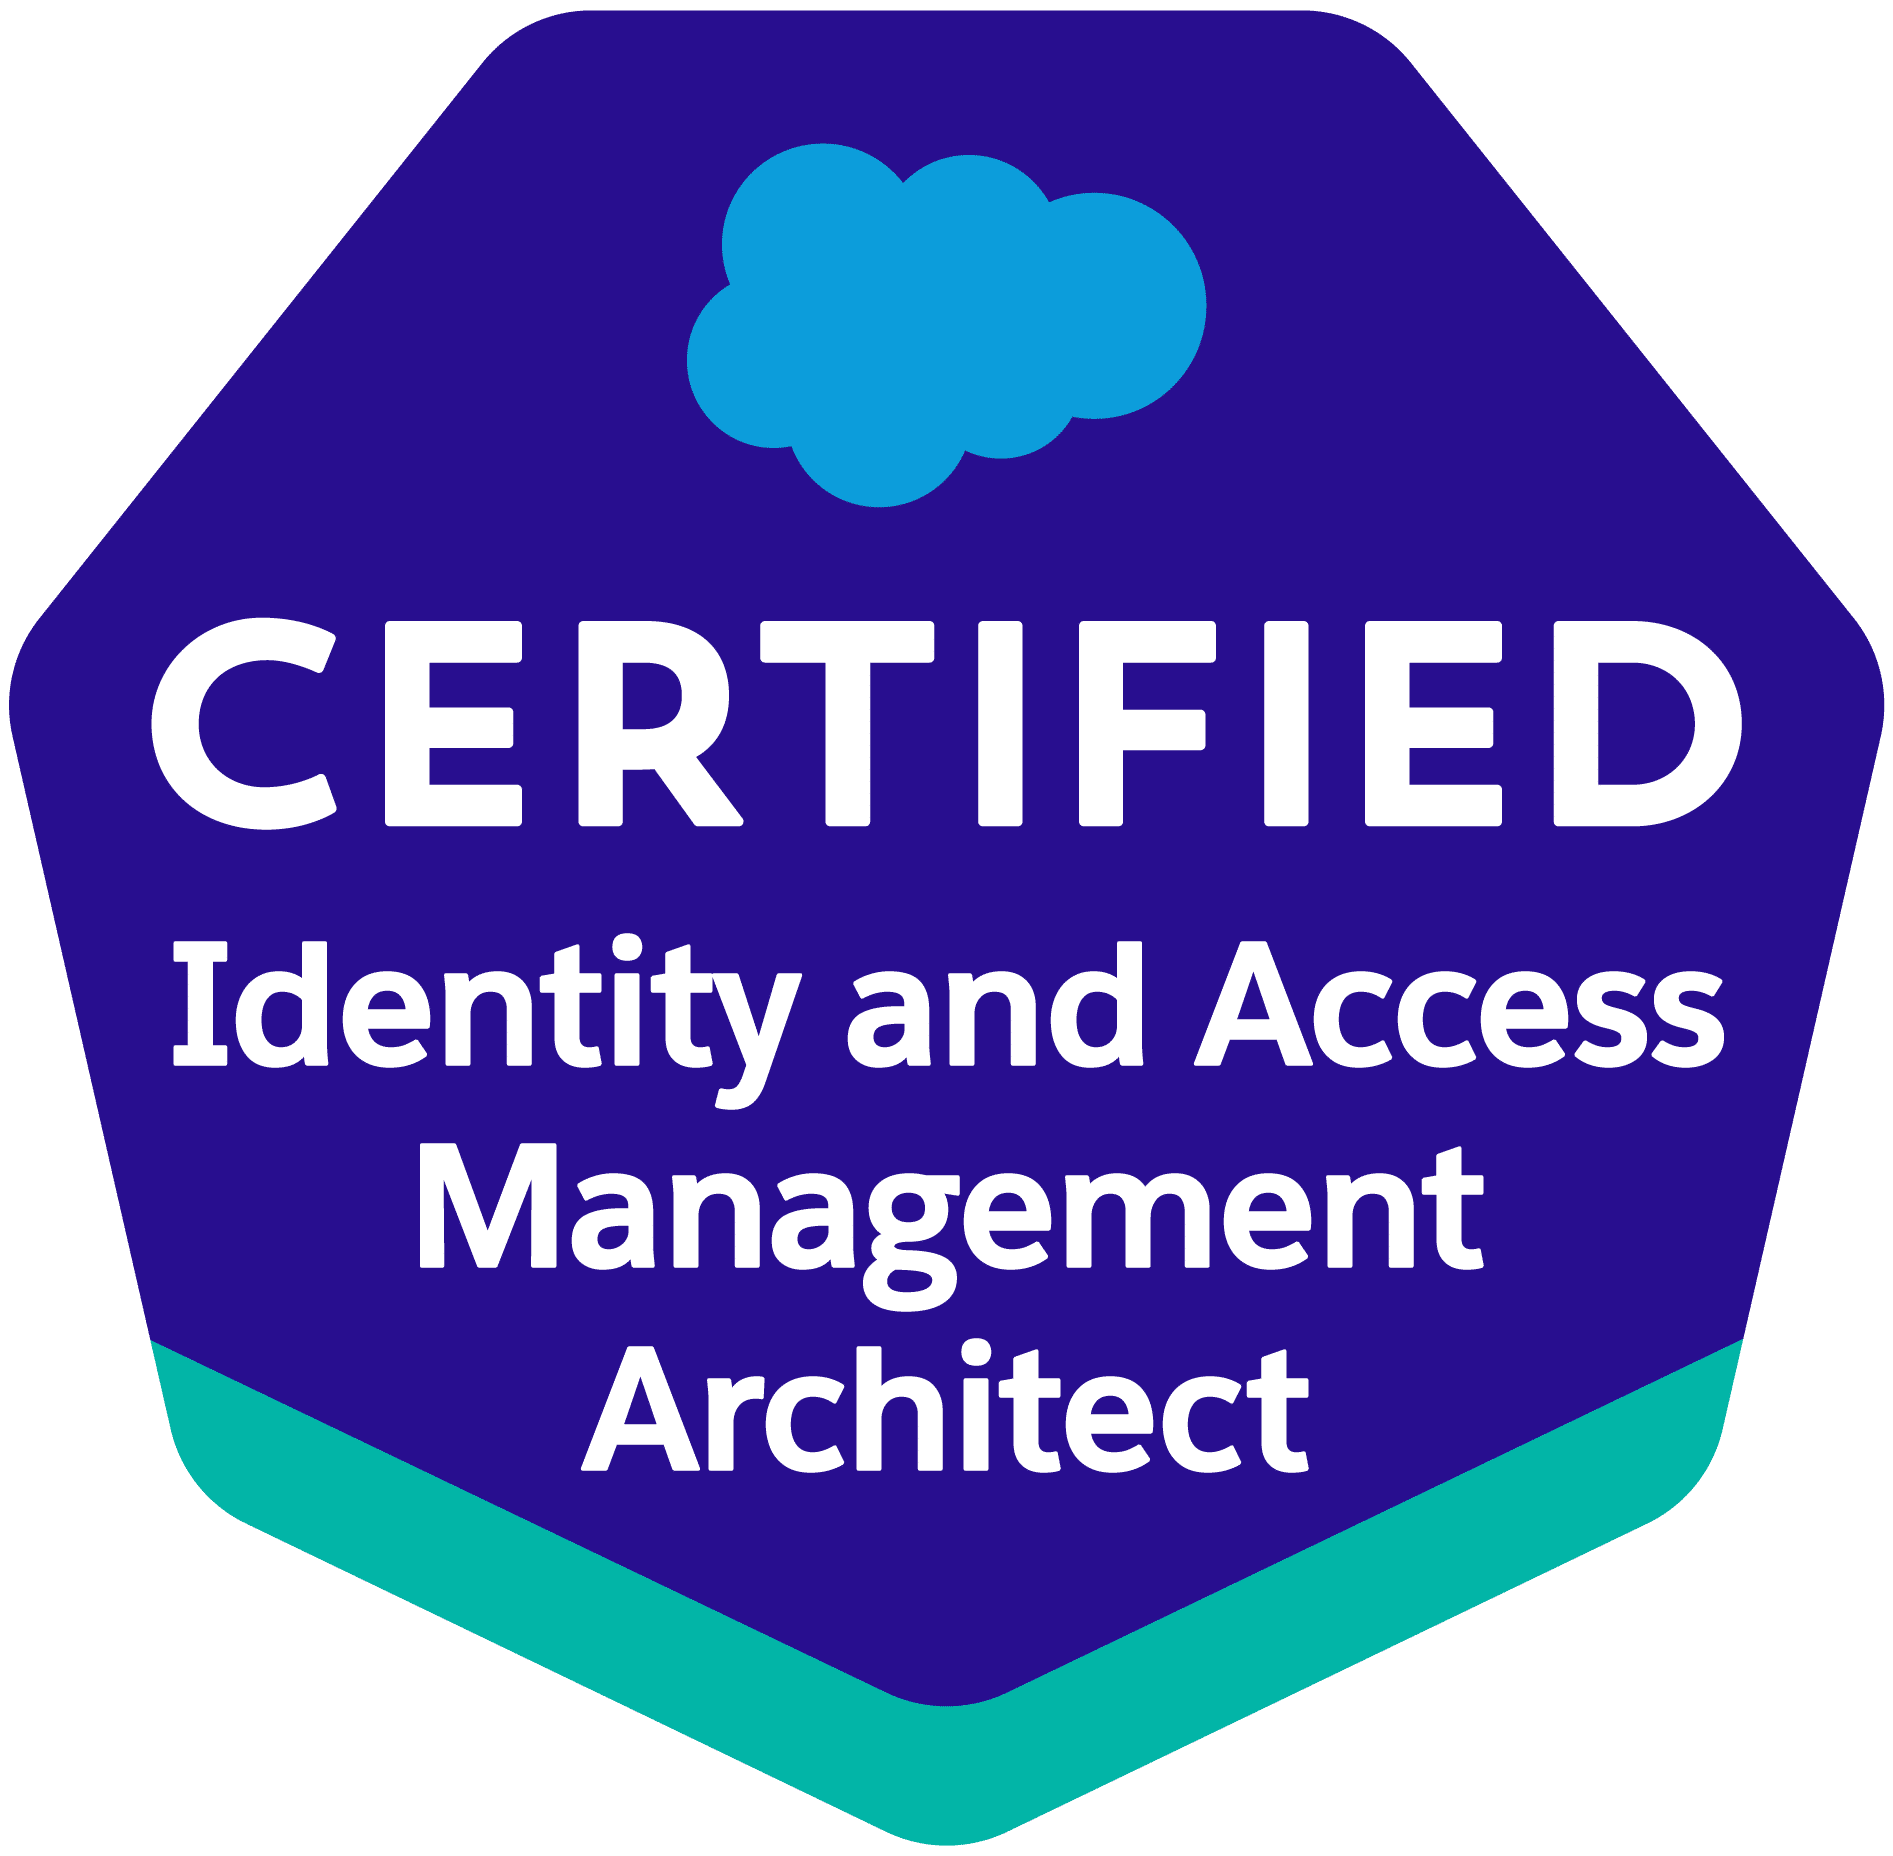 identify and access management